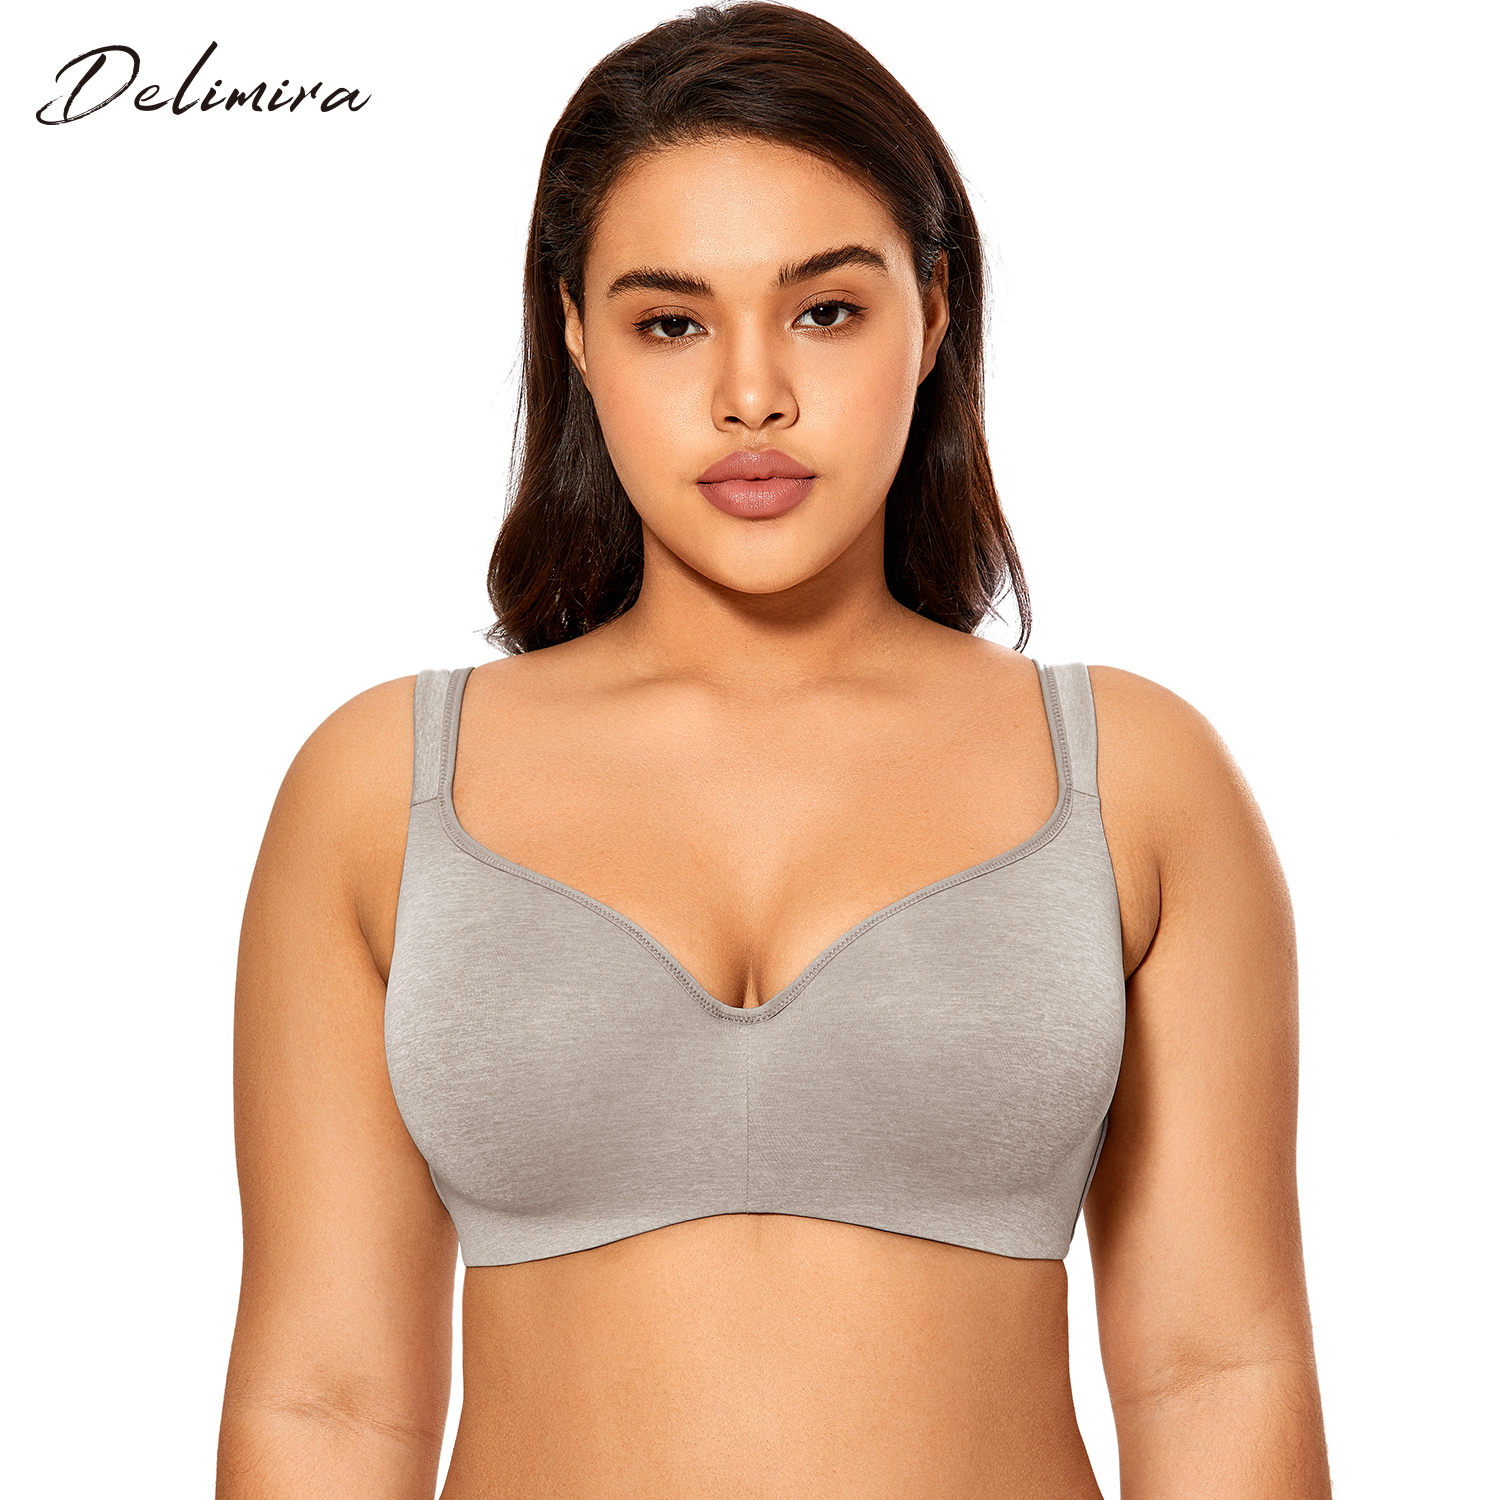 Delimira Women's Smooth Full Coverage Big Size T-Shirt Bra - Price history  & Review, AliExpress Seller - DELIMIRA Official Store